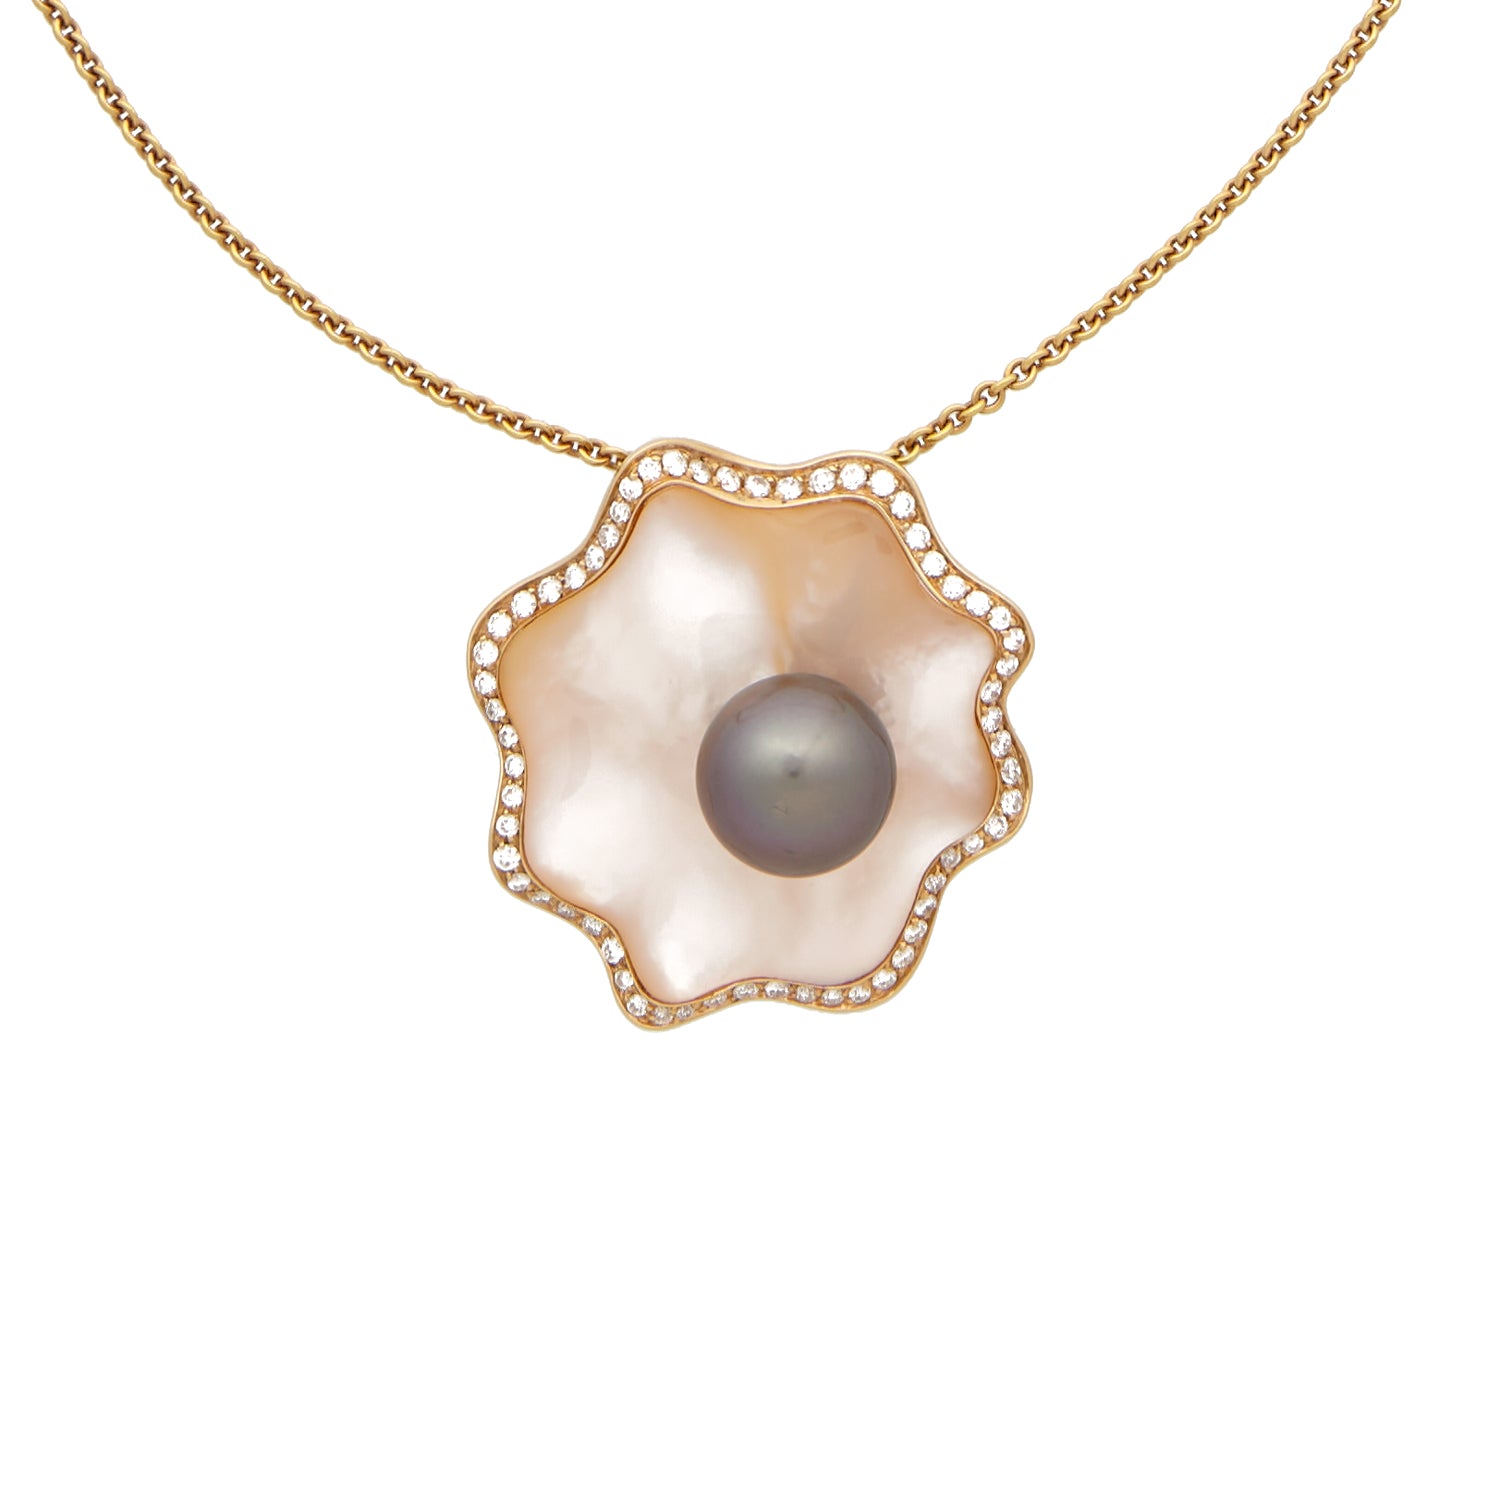 Rose gold necklace with pendant of mother of pearl, tahiti pearl and diamond